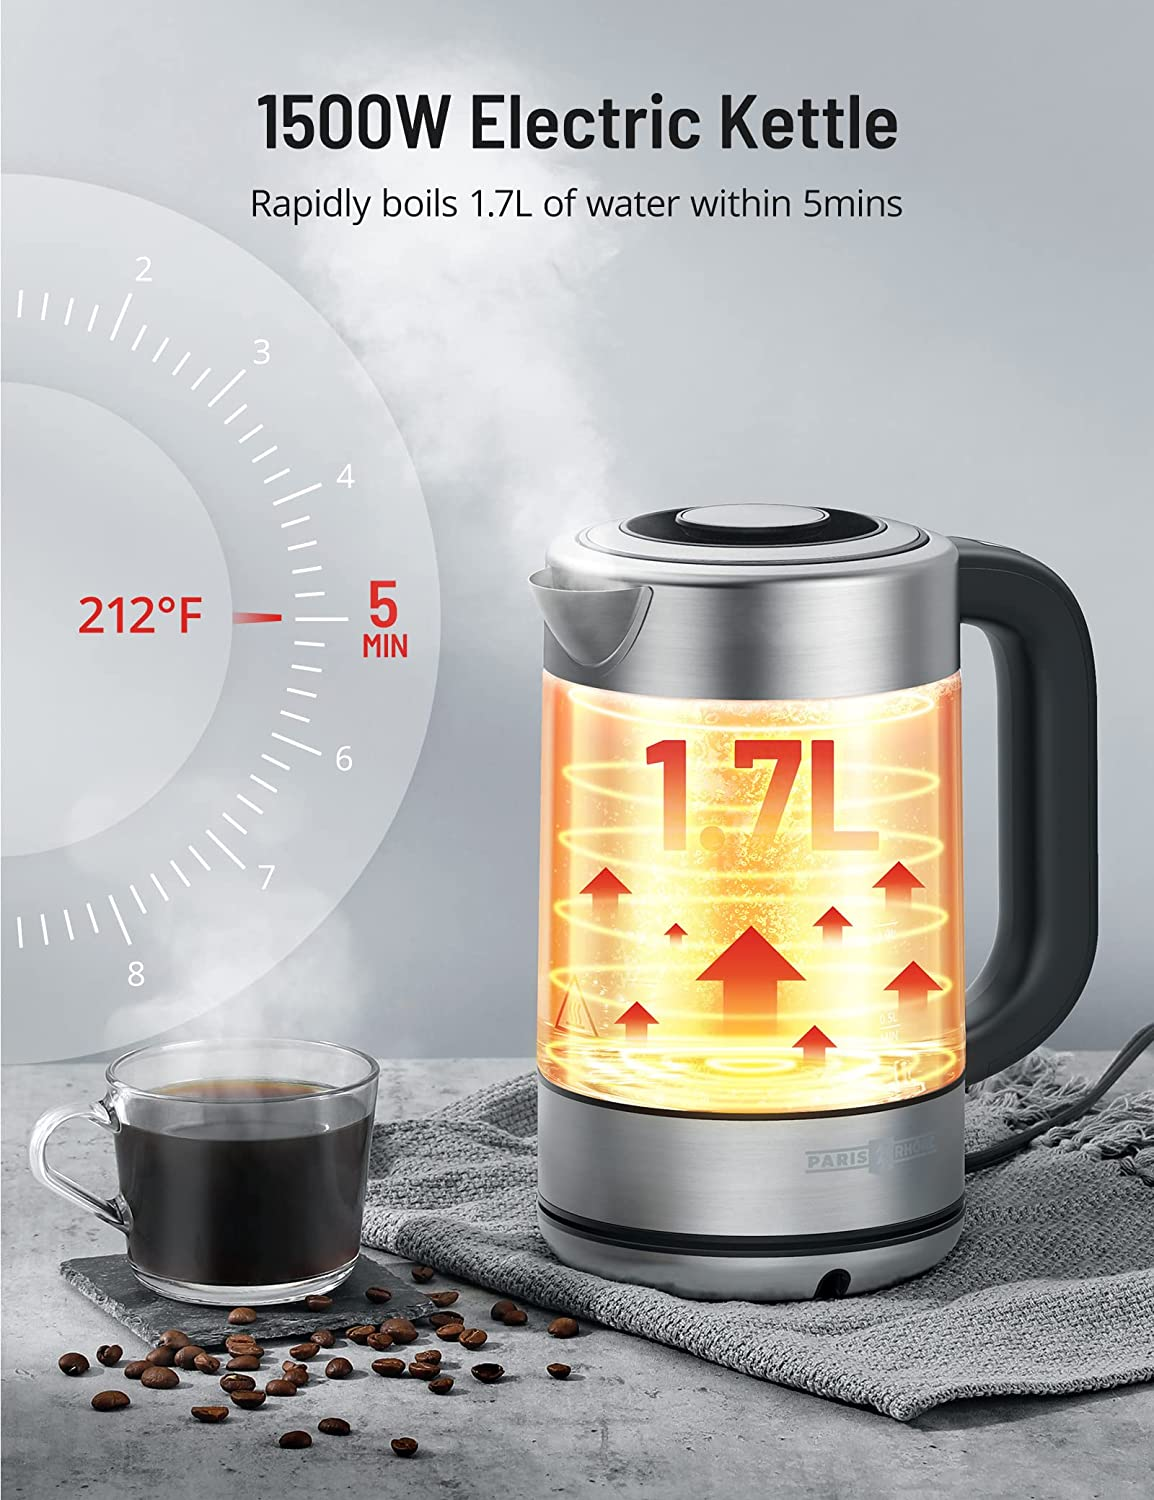 Double Wall Electric Kettle - Black 37 oz - The Republic of Tea | Double Wall Electric Kettle - 37 oz